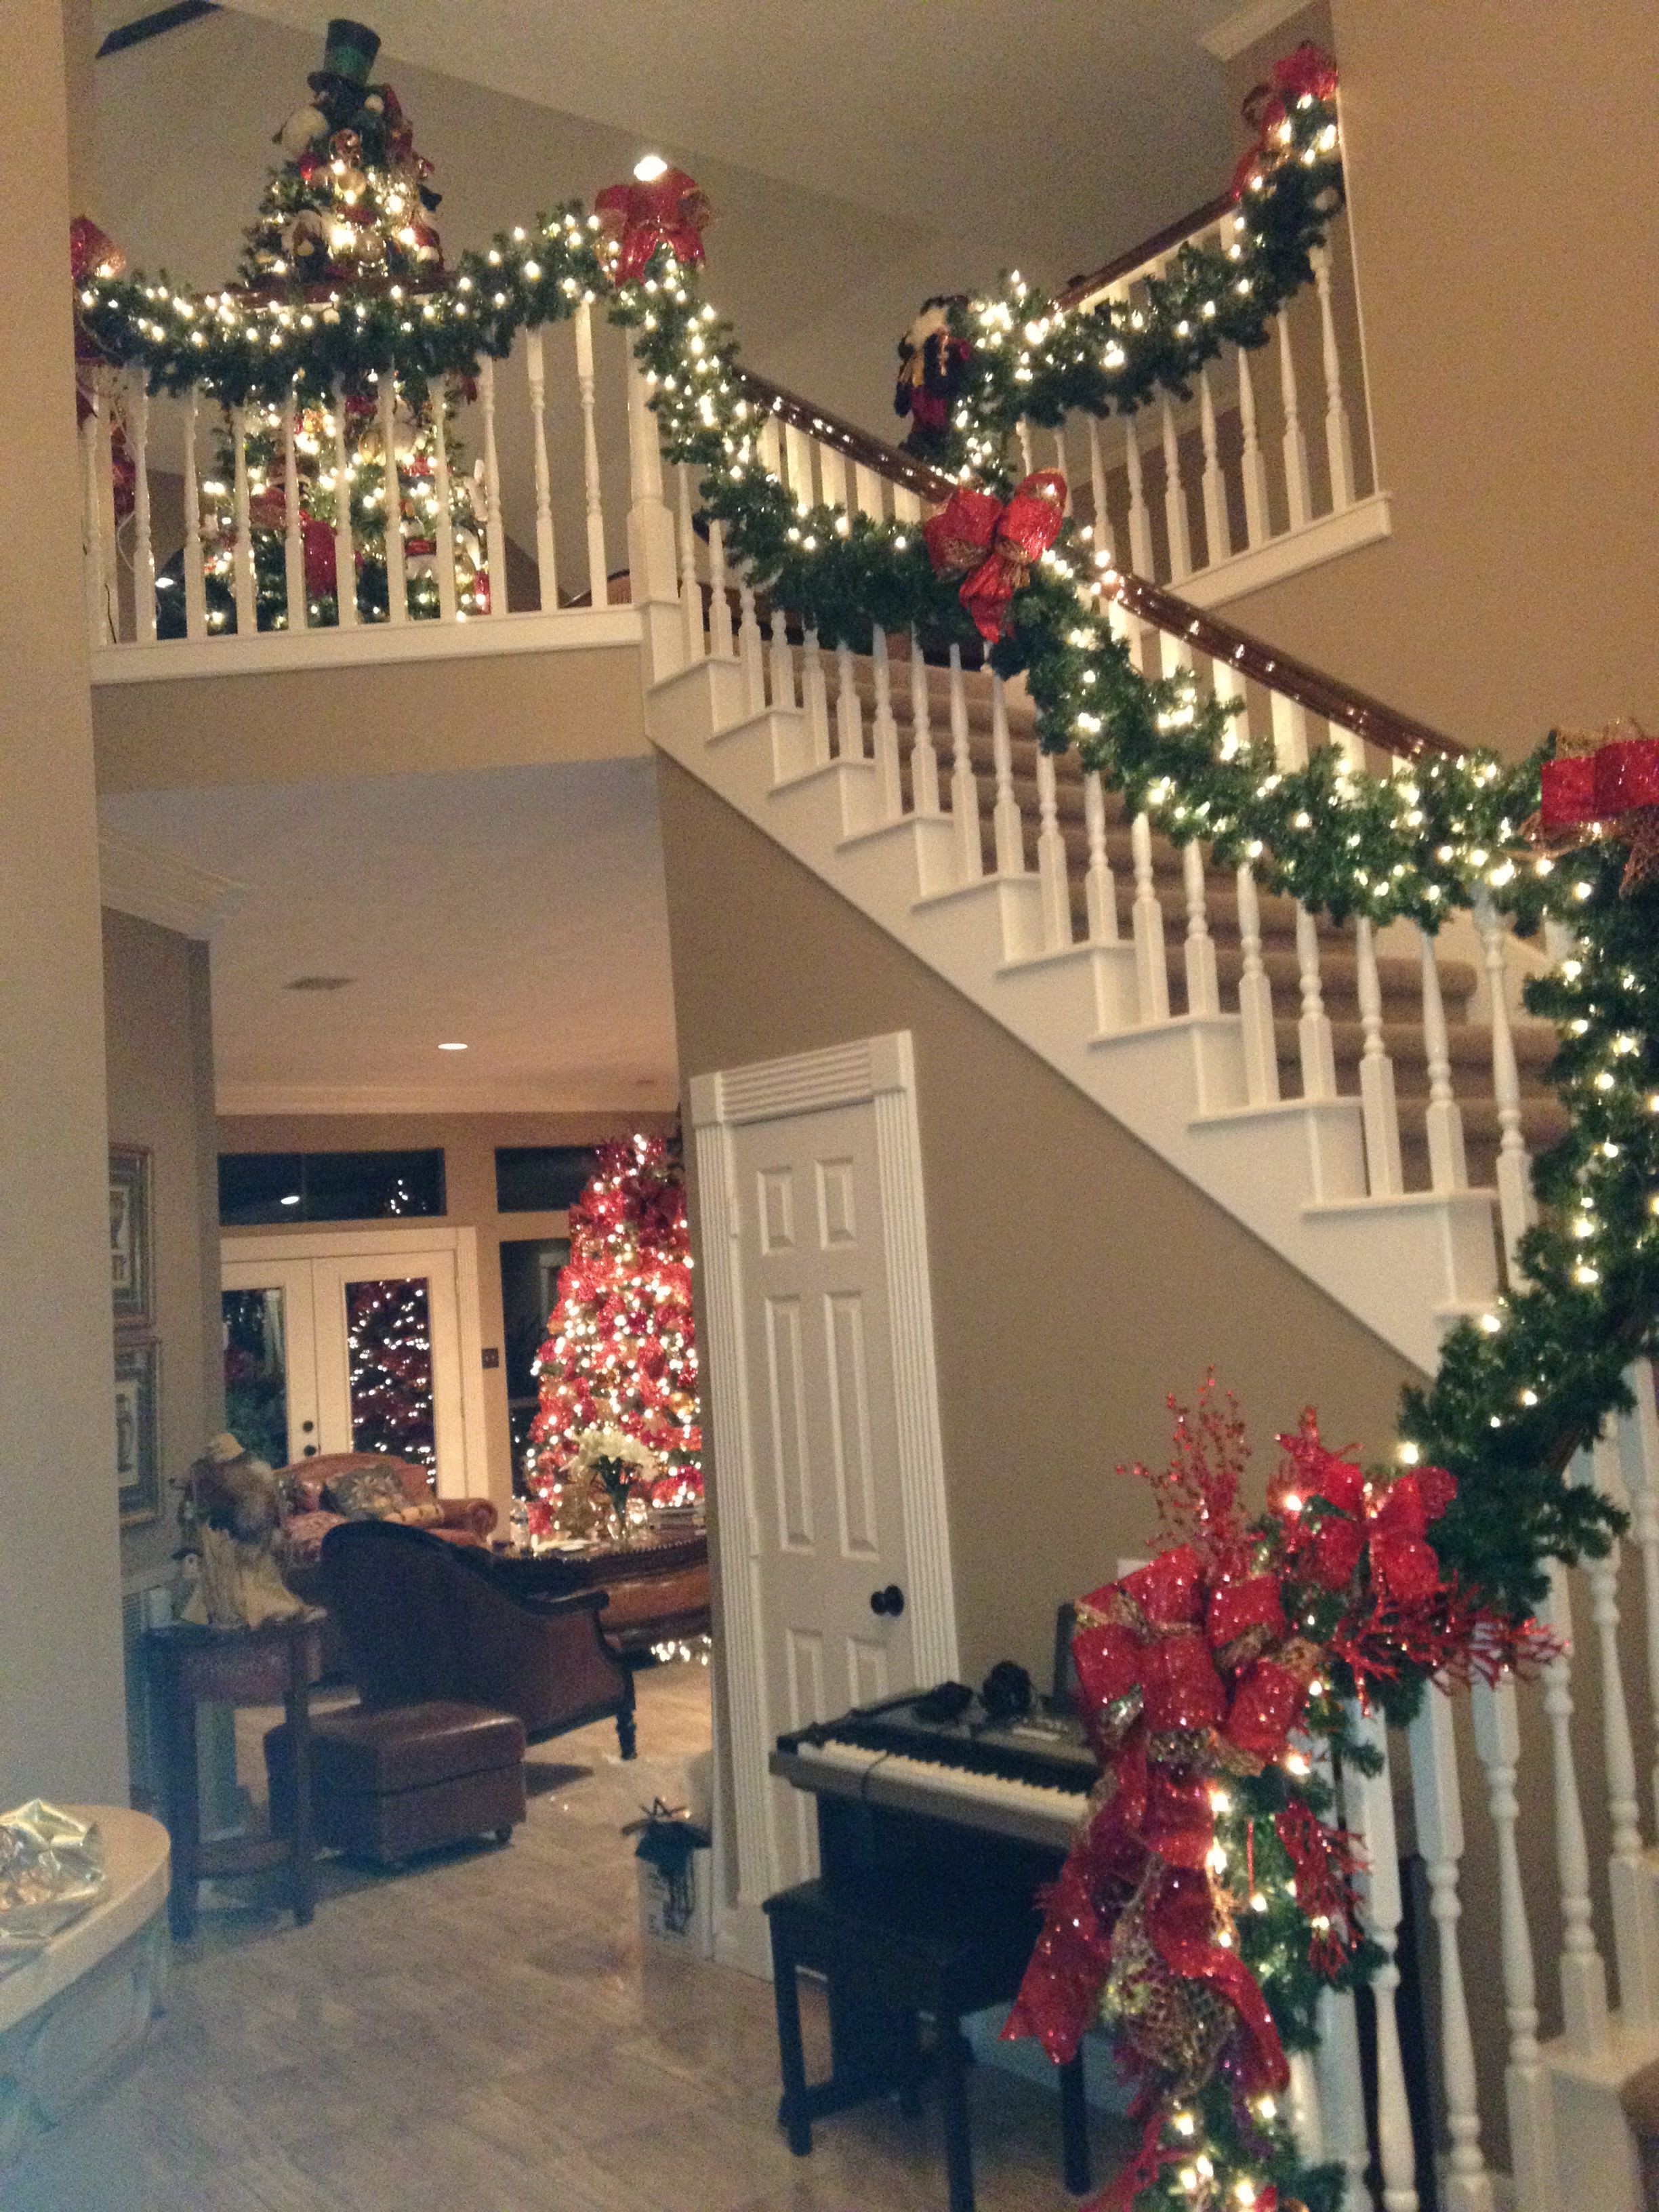 Christmas Staircase Decorating
 Wrap it Design Holiday Decor Pinterest